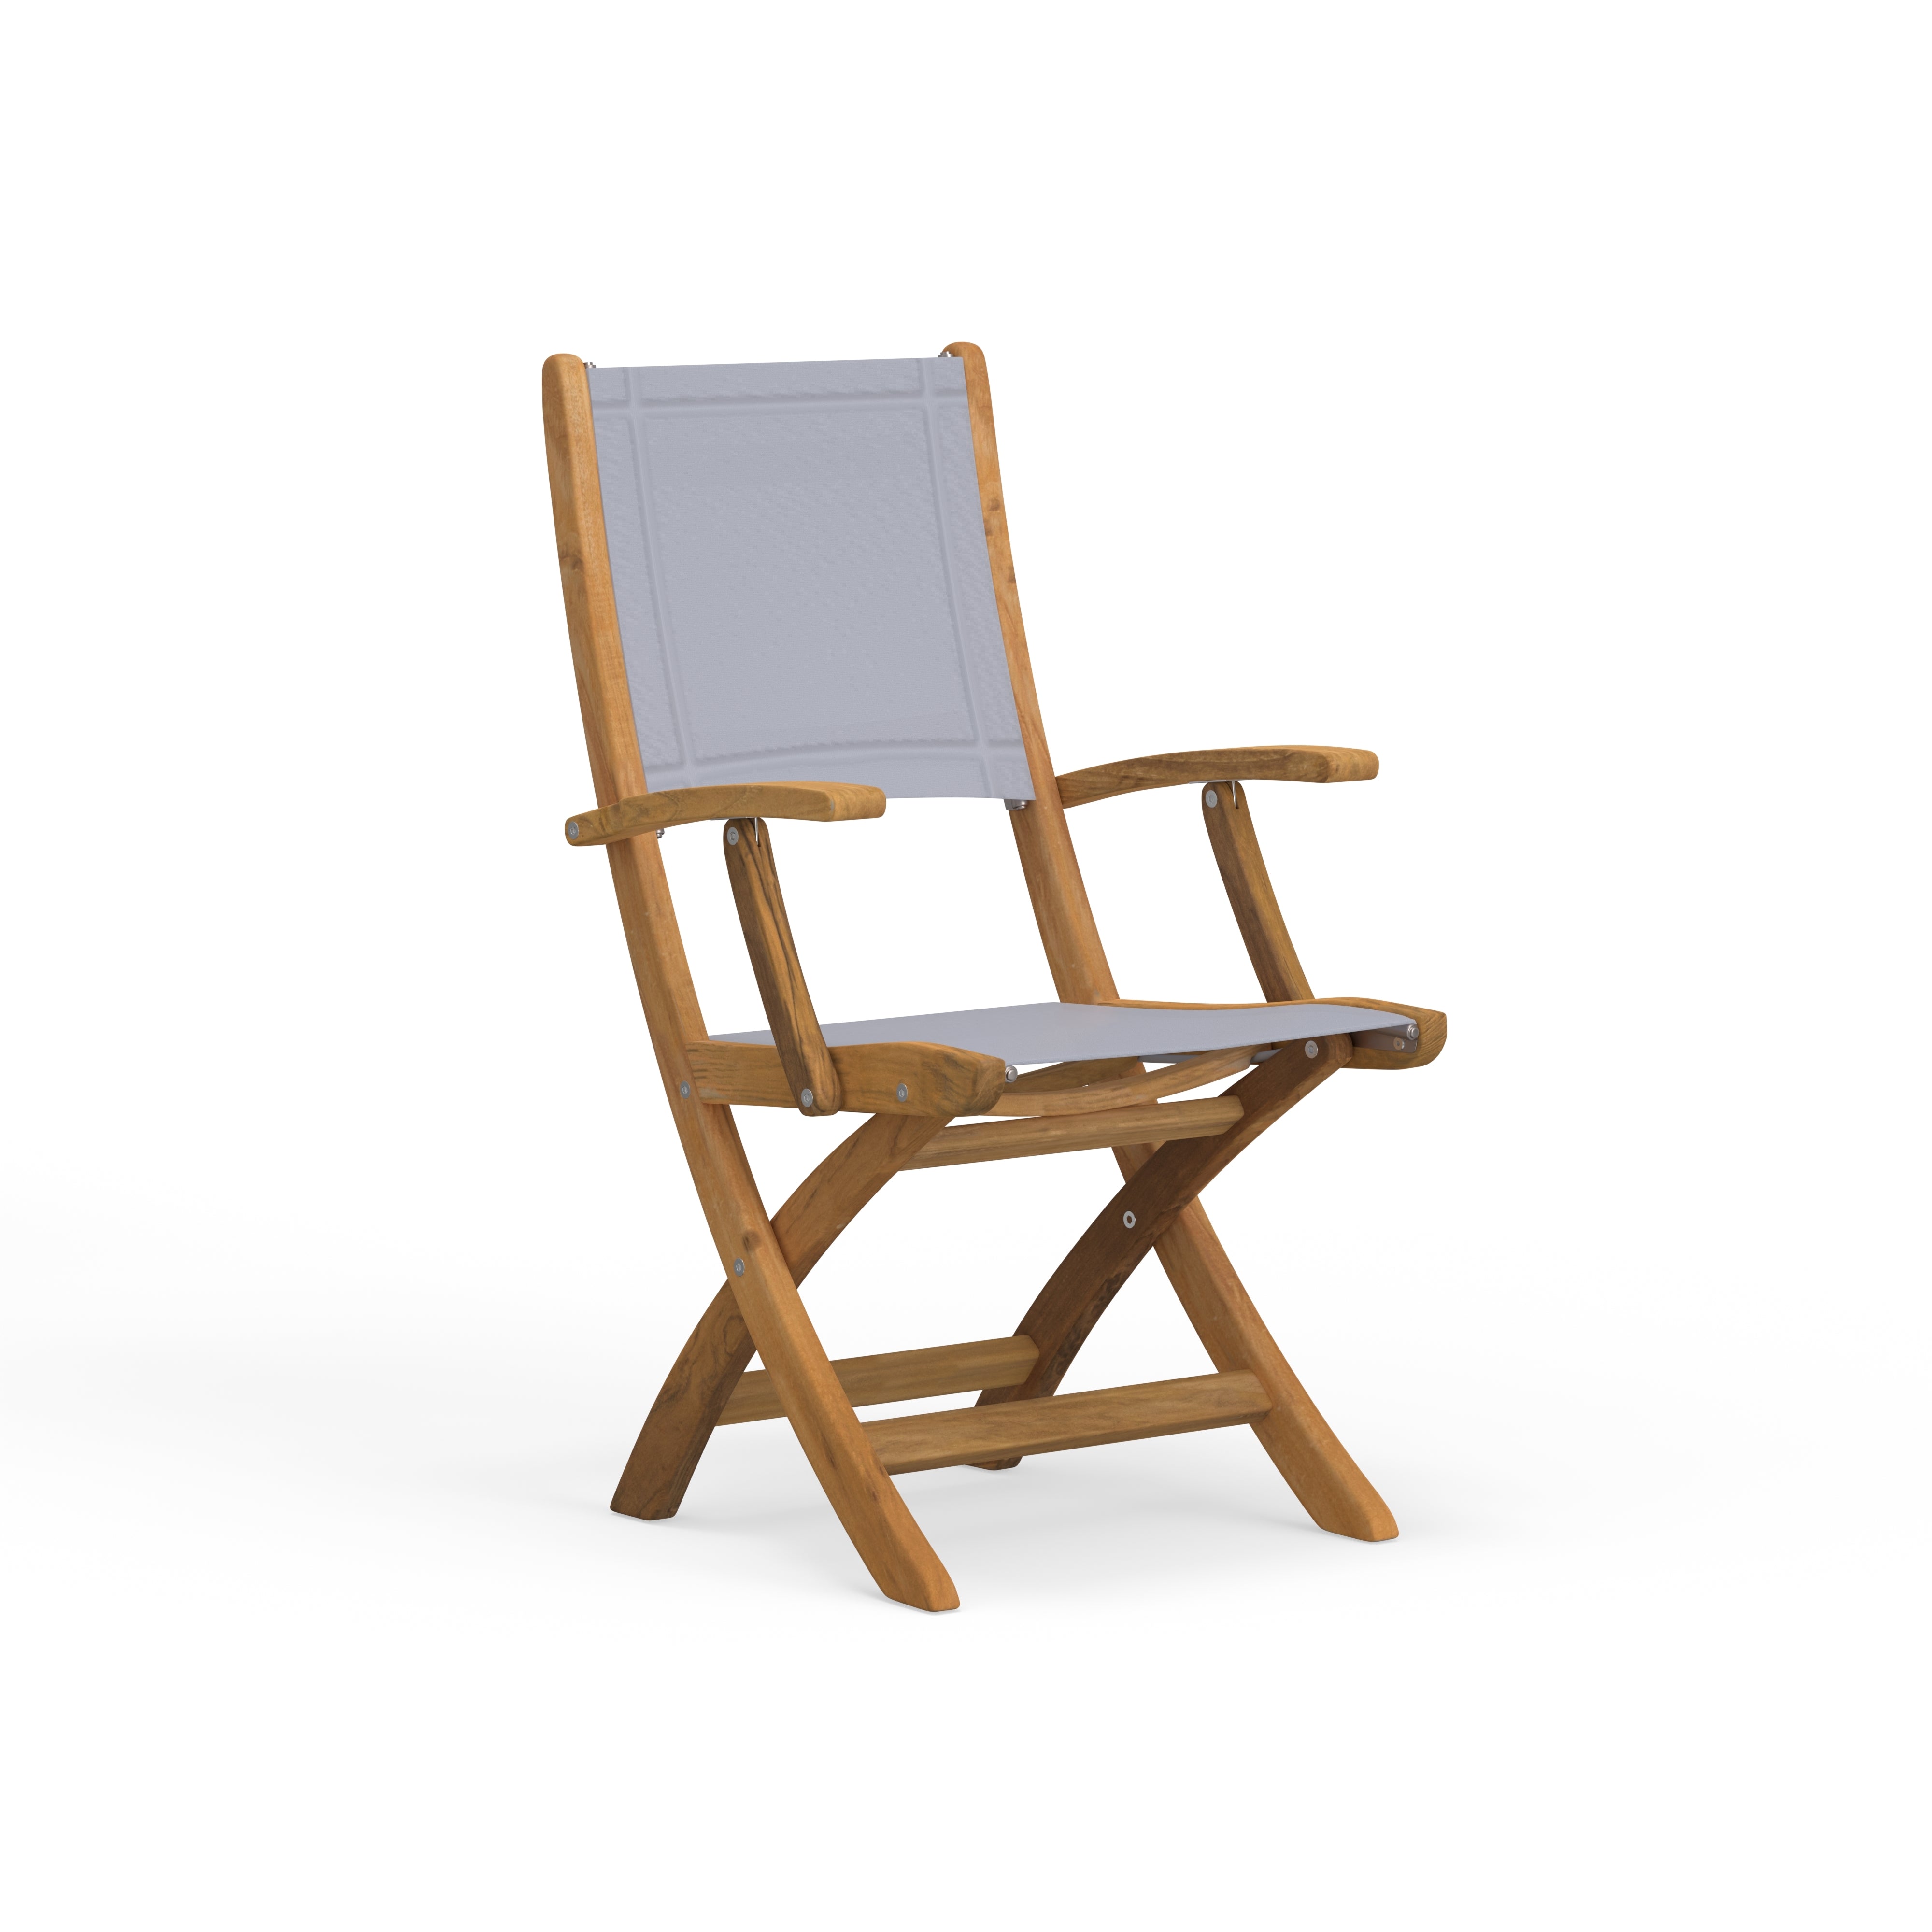  Most Comfortable Outdoor Folding Arm Chair